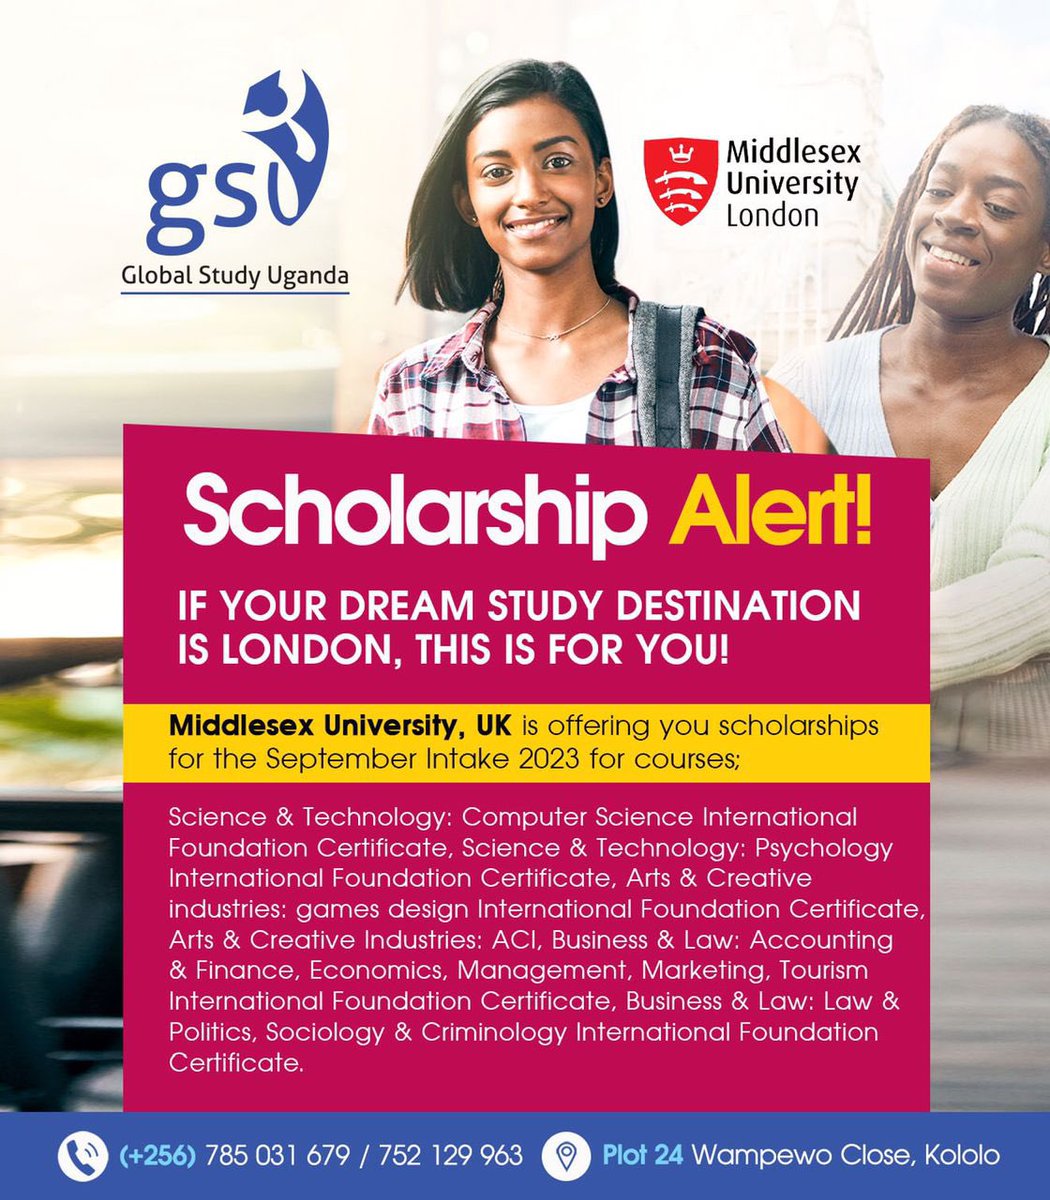 🚨 Scholarship Alert 🚨 

Are you looking forward to London as a study destination?
Well, you are in for a treat! @MiddlesexUni is offering you scholarships for the September 2023 Intake (see poster for more info).

#GSU #2023Intake #SeptemberIntake #London #College #University